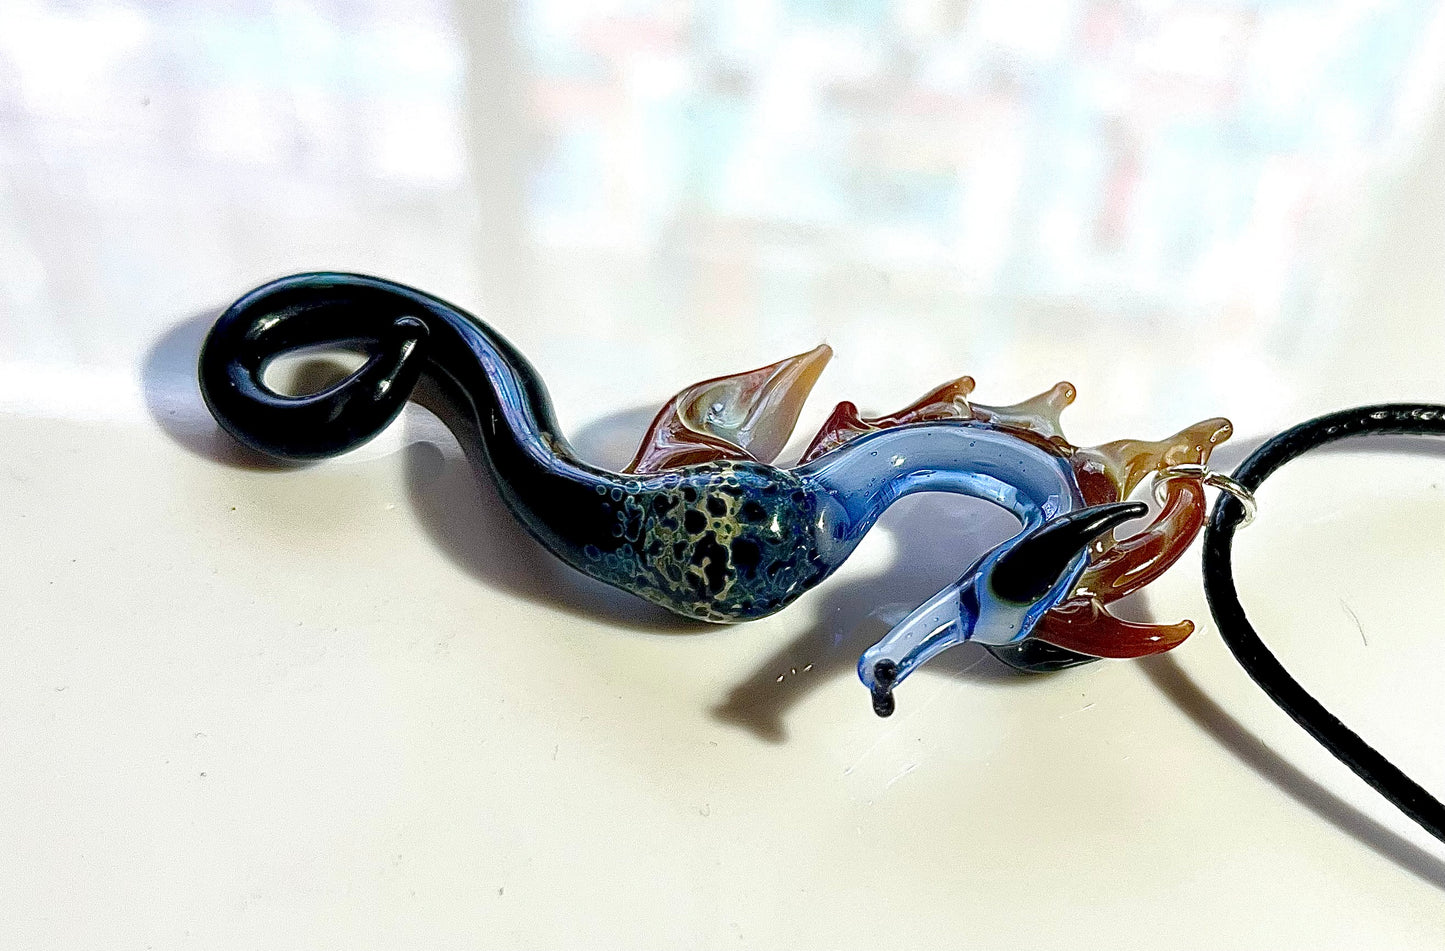 Magnificent Glass Blown Seahorse Jewelry - GLASSnFIRE